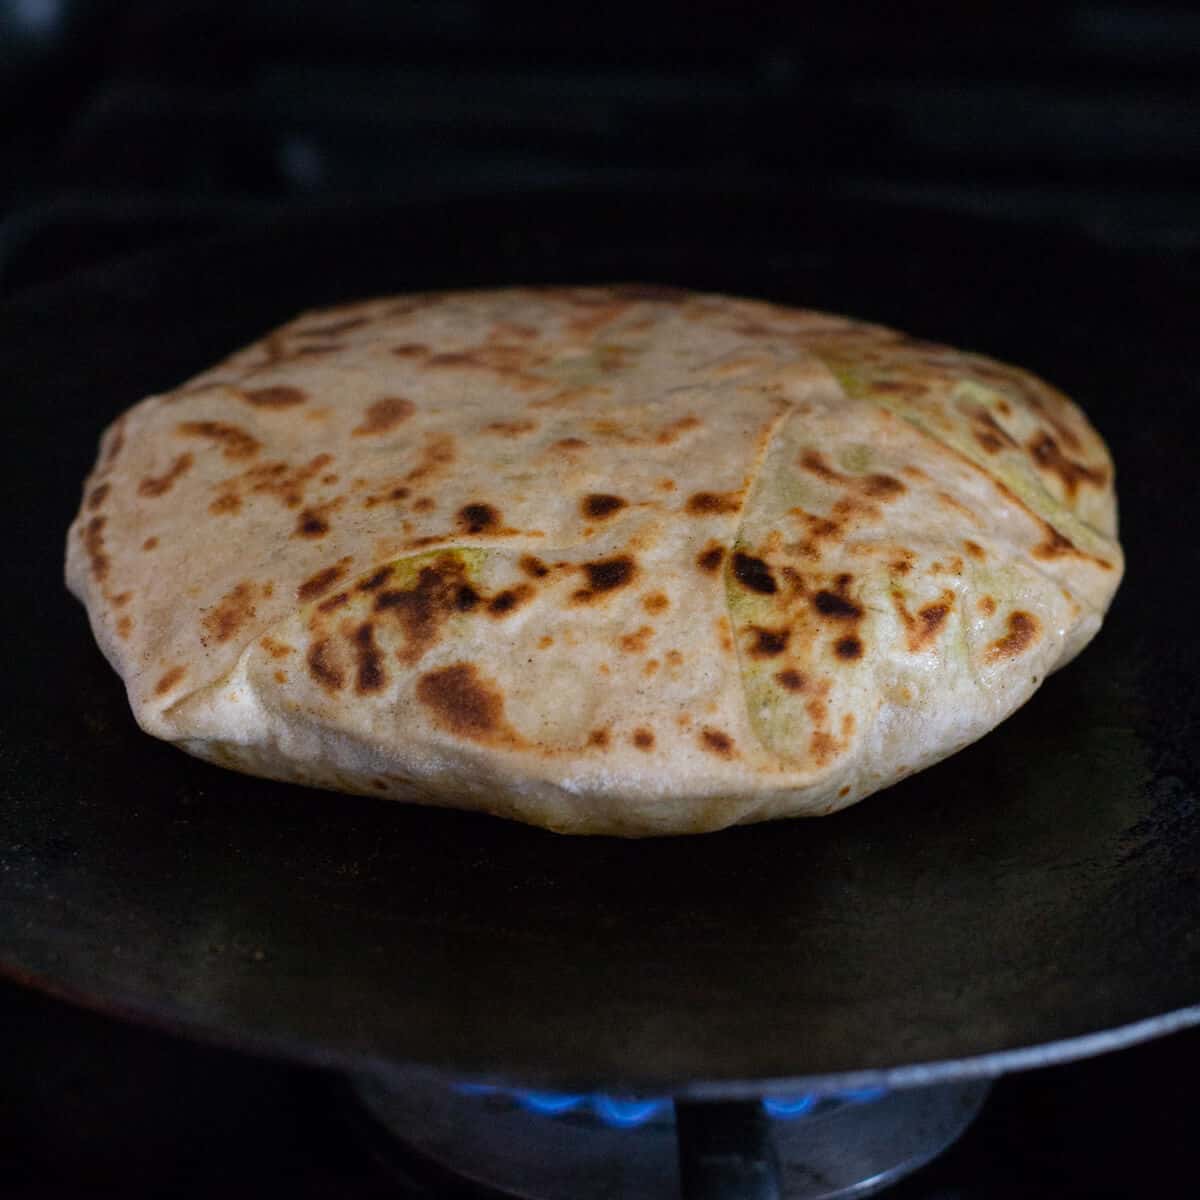 Puffed up Aloo paratha in a pan over gas